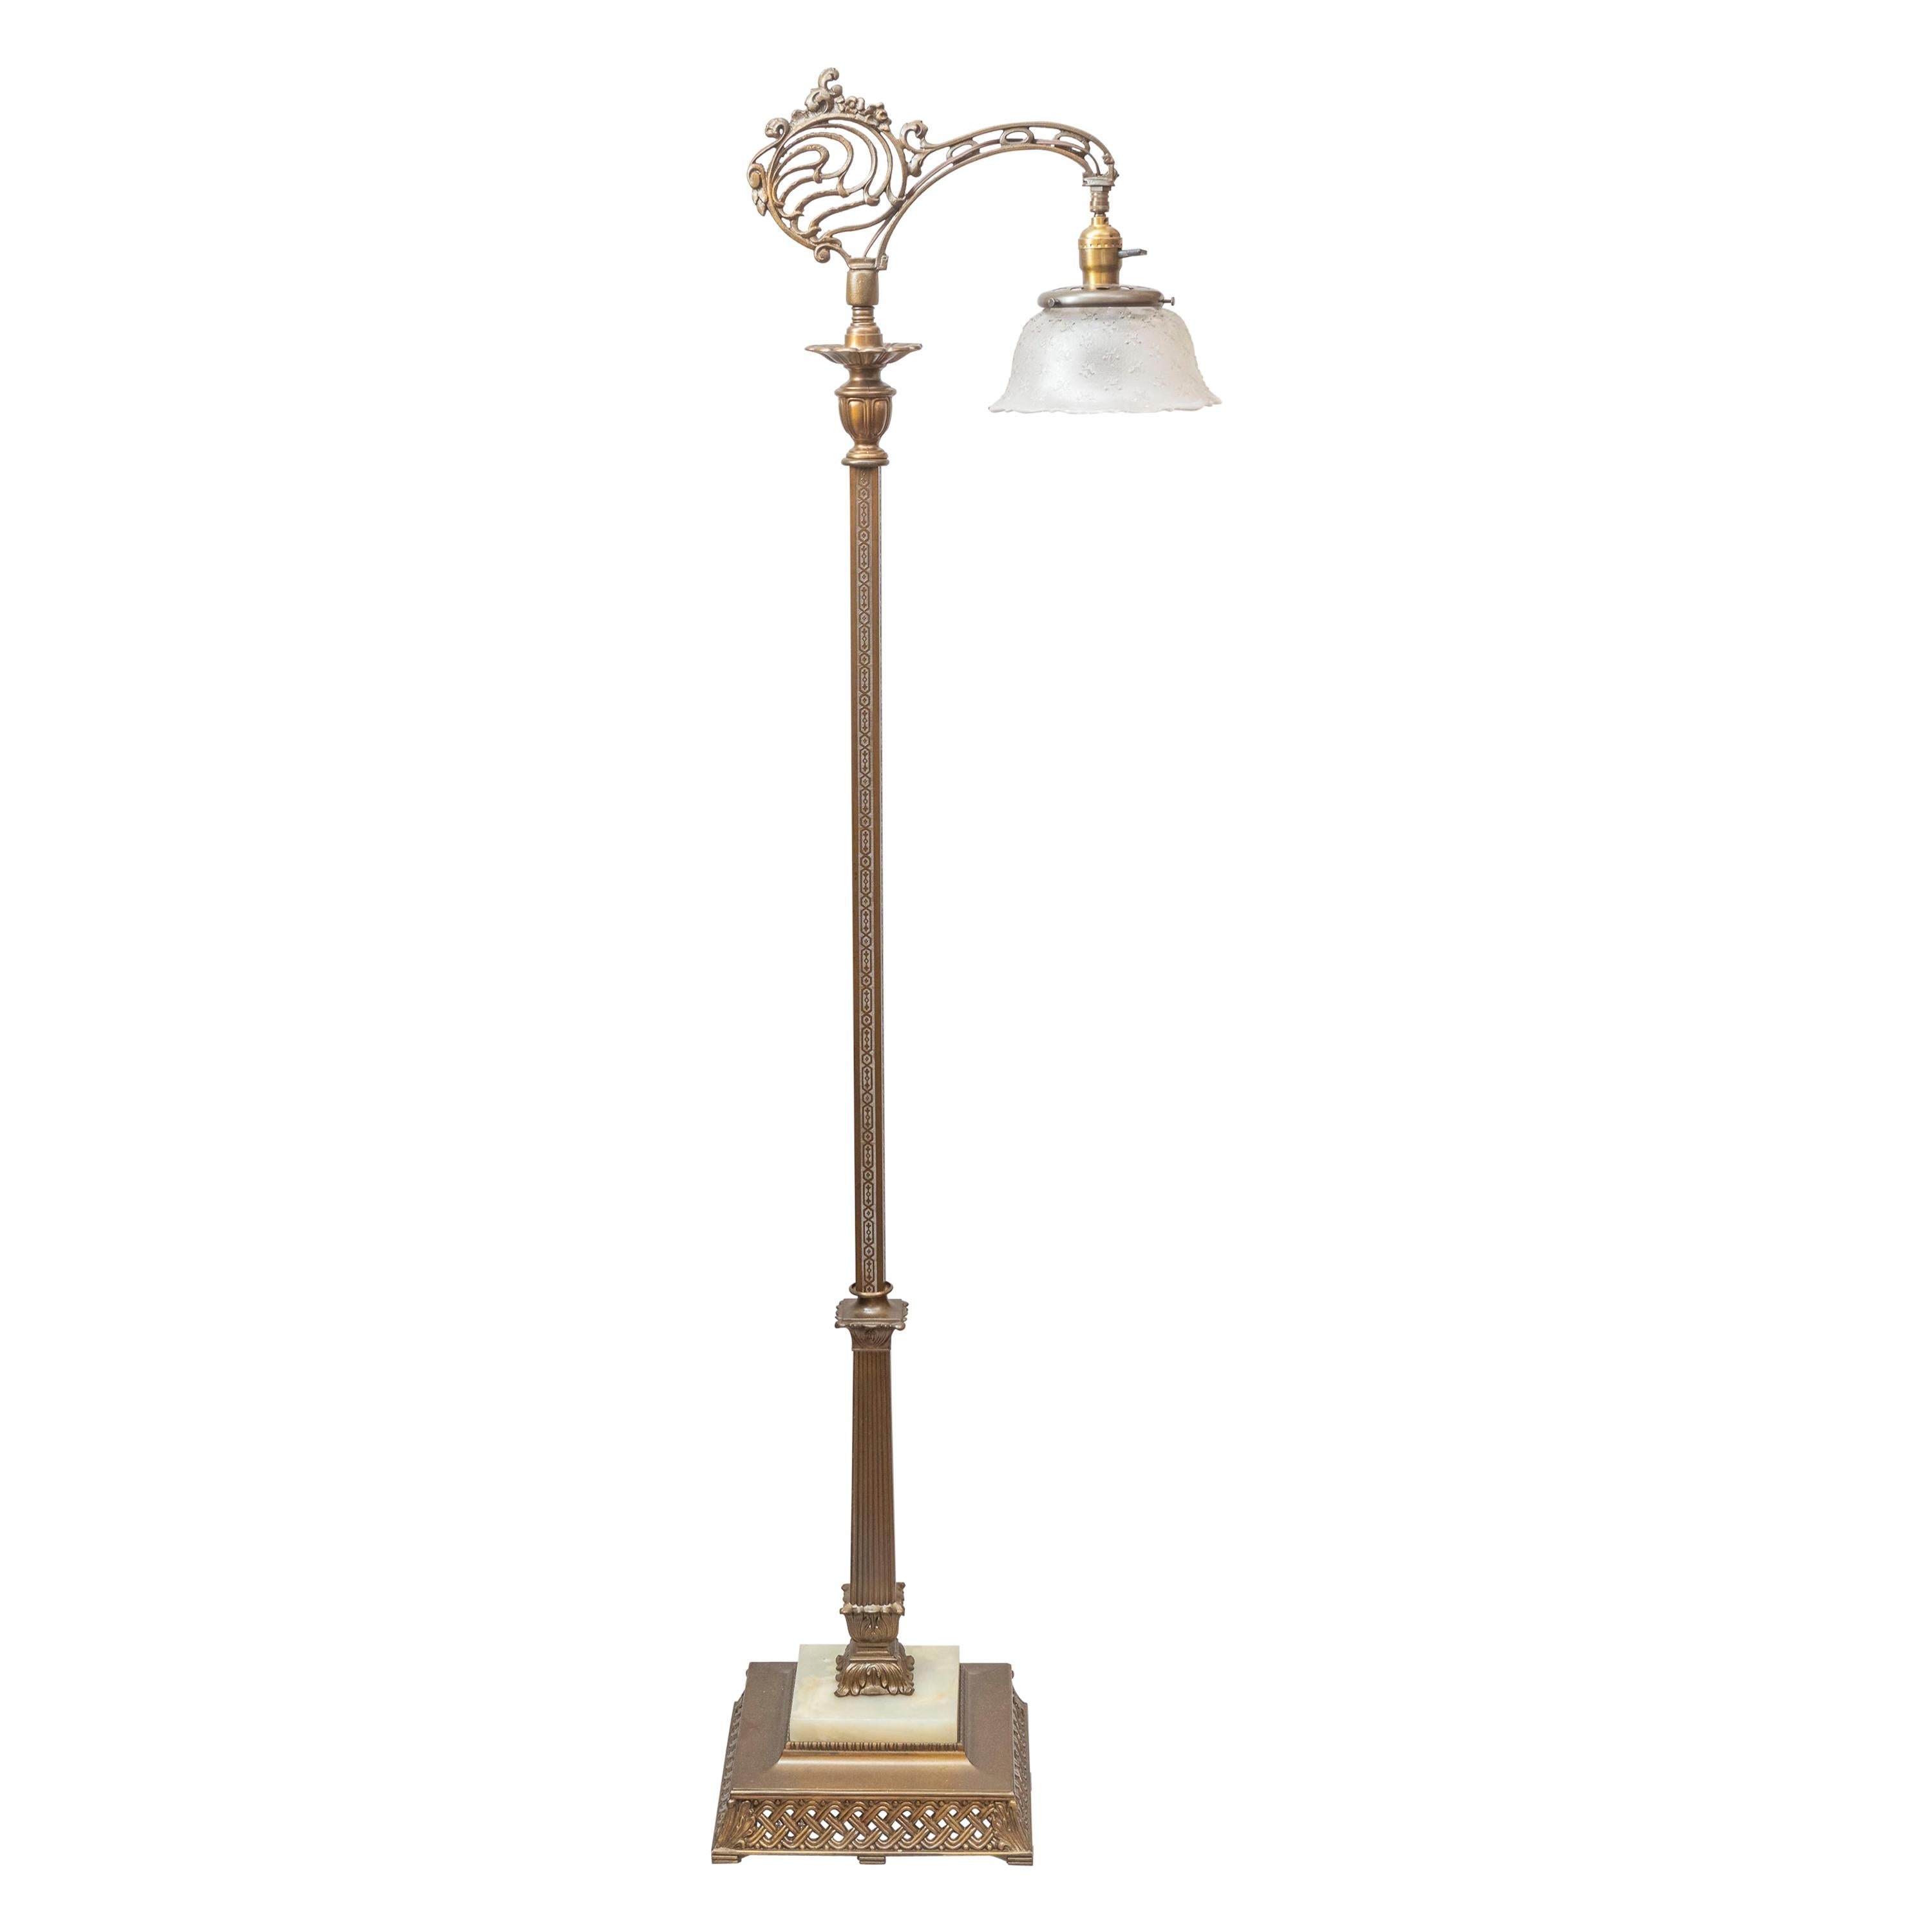 Antique Floor Lamp, Bridge Style With Period Glass Shade | lupon.gov.ph